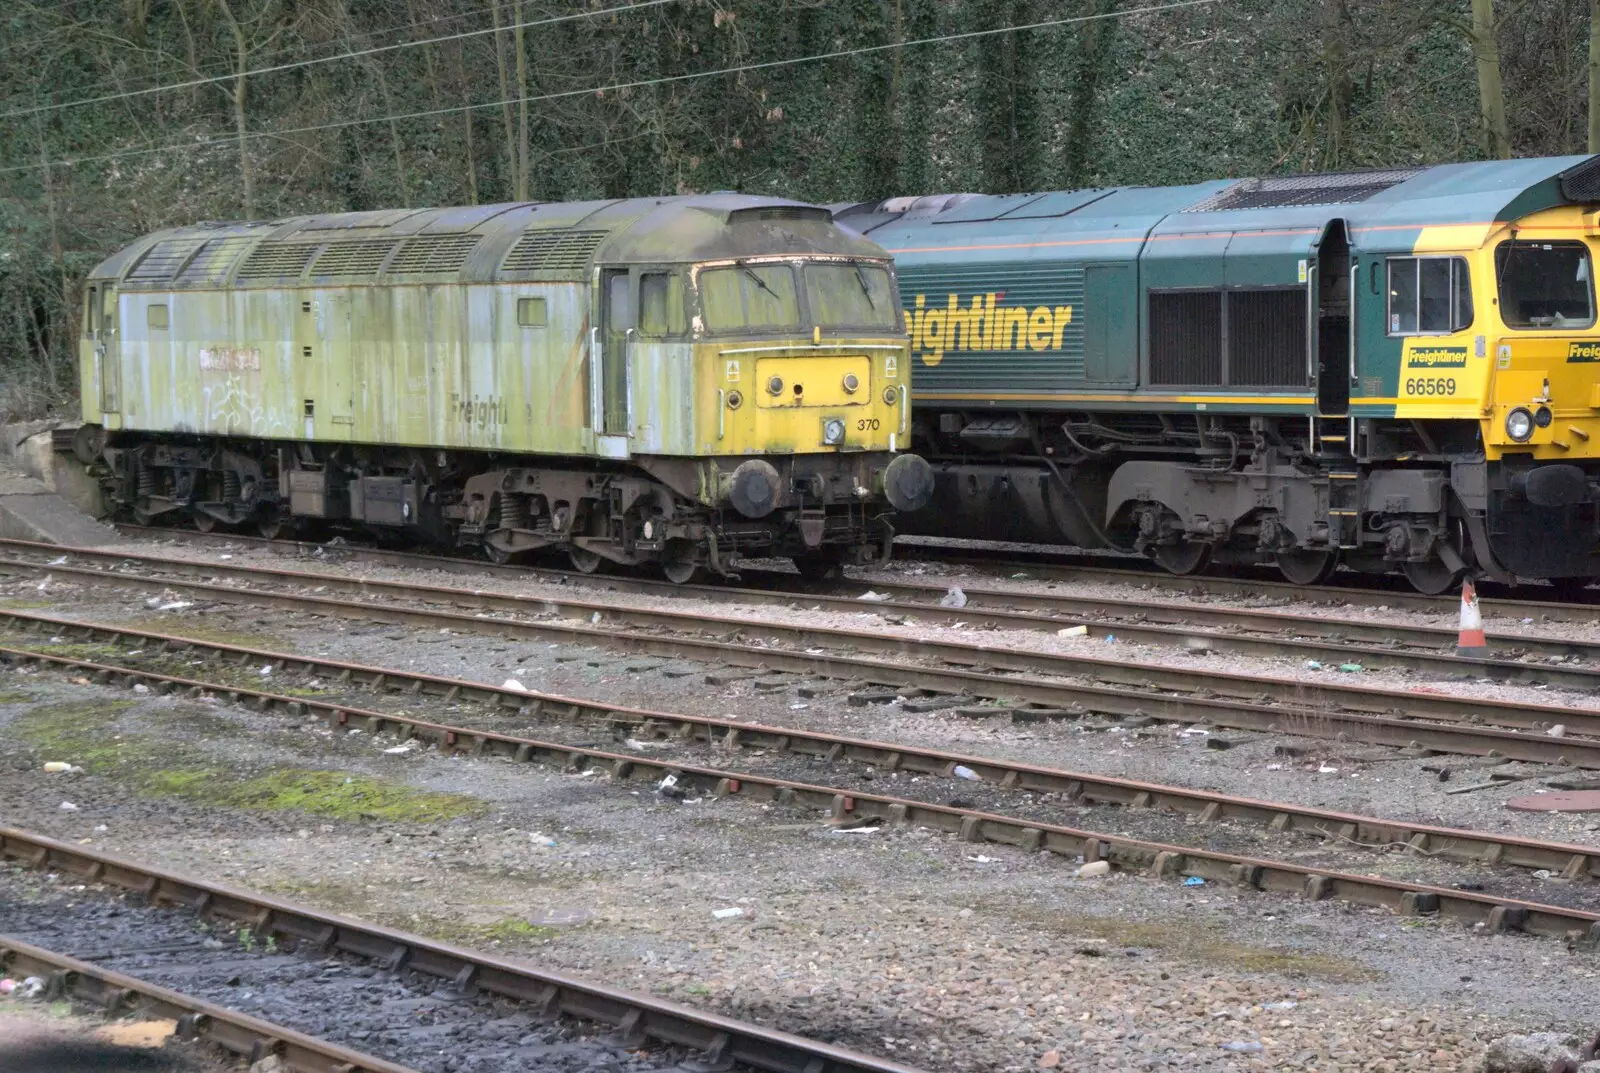 A derelict Class 47 Freightliner loco at Ipswich, from A Trip to Orford Castle, Suffolk - 14th March 2009